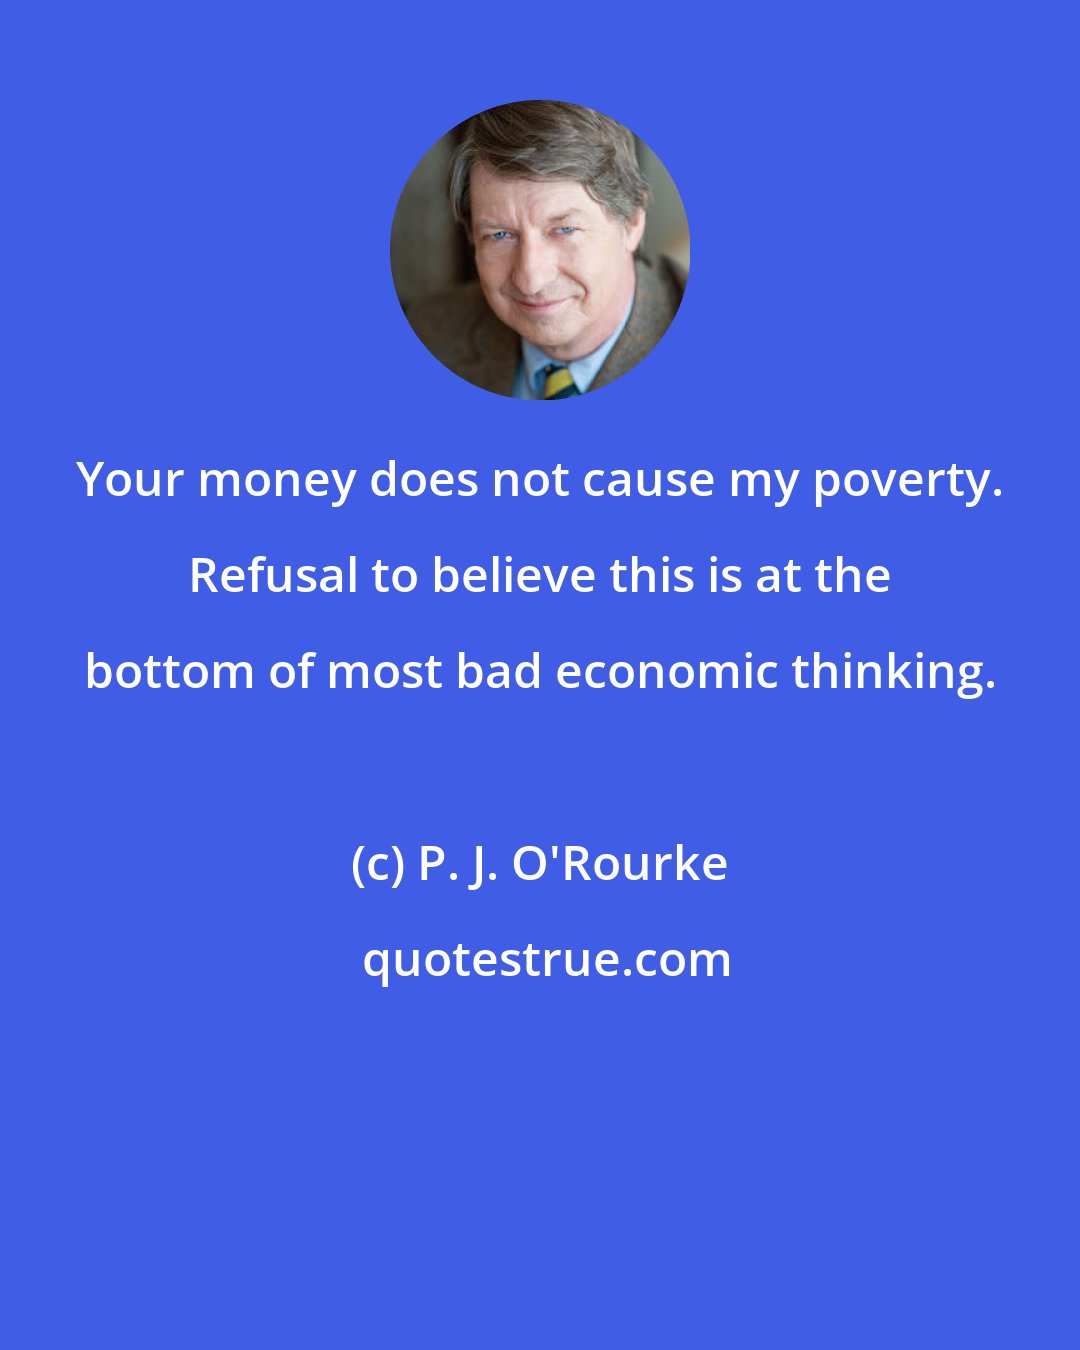 P. J. O'Rourke: Your money does not cause my poverty. Refusal to believe this is at the bottom of most bad economic thinking.